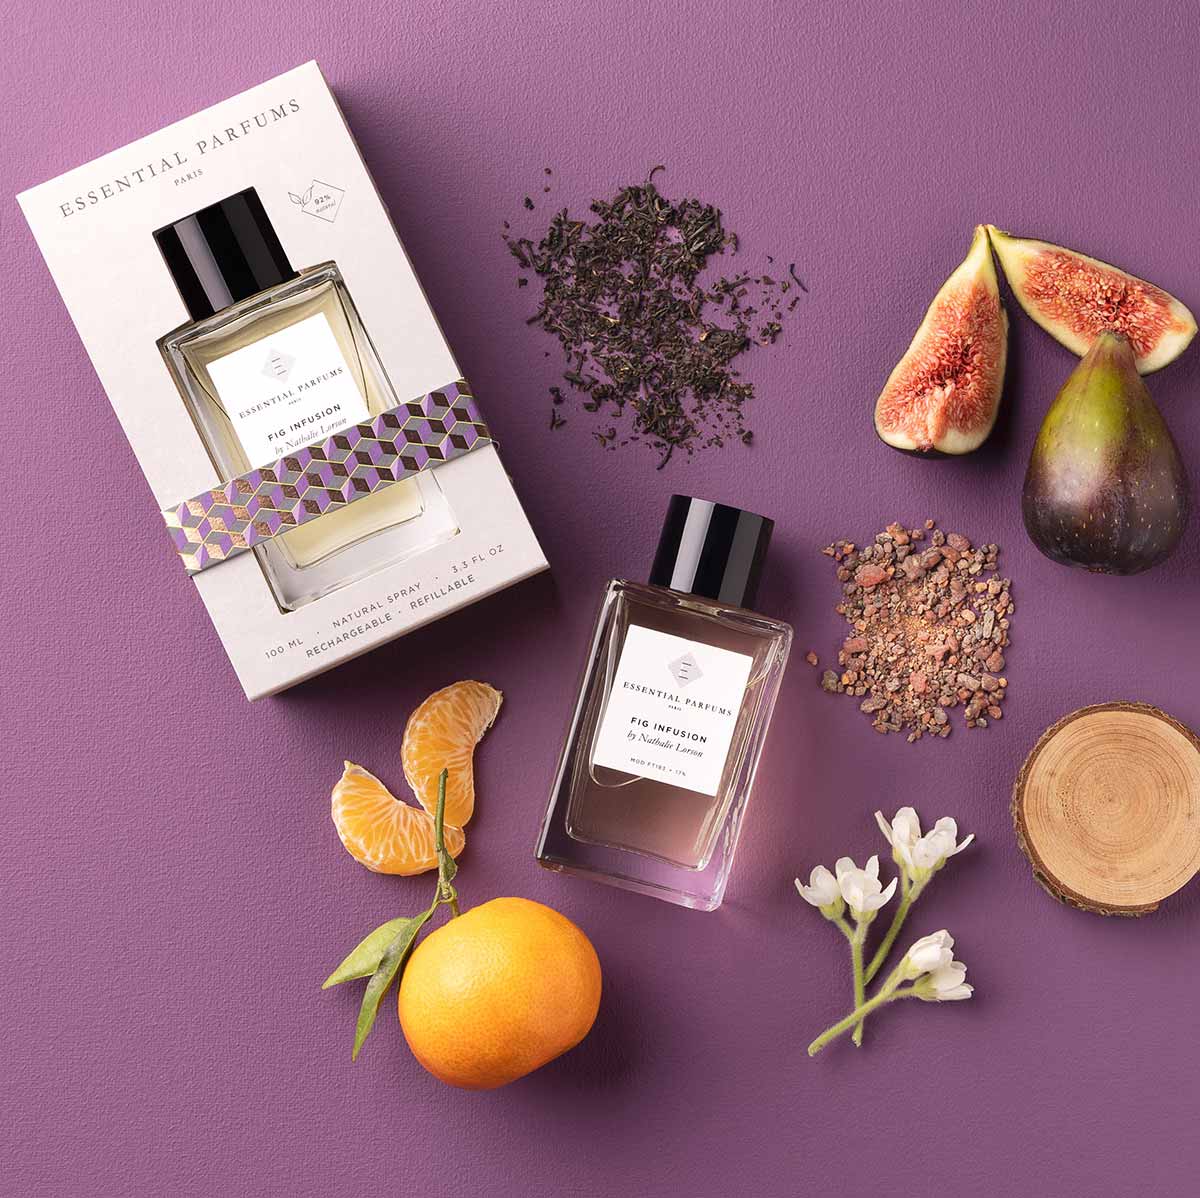 FIG INFUSION by Nathalie Lorson